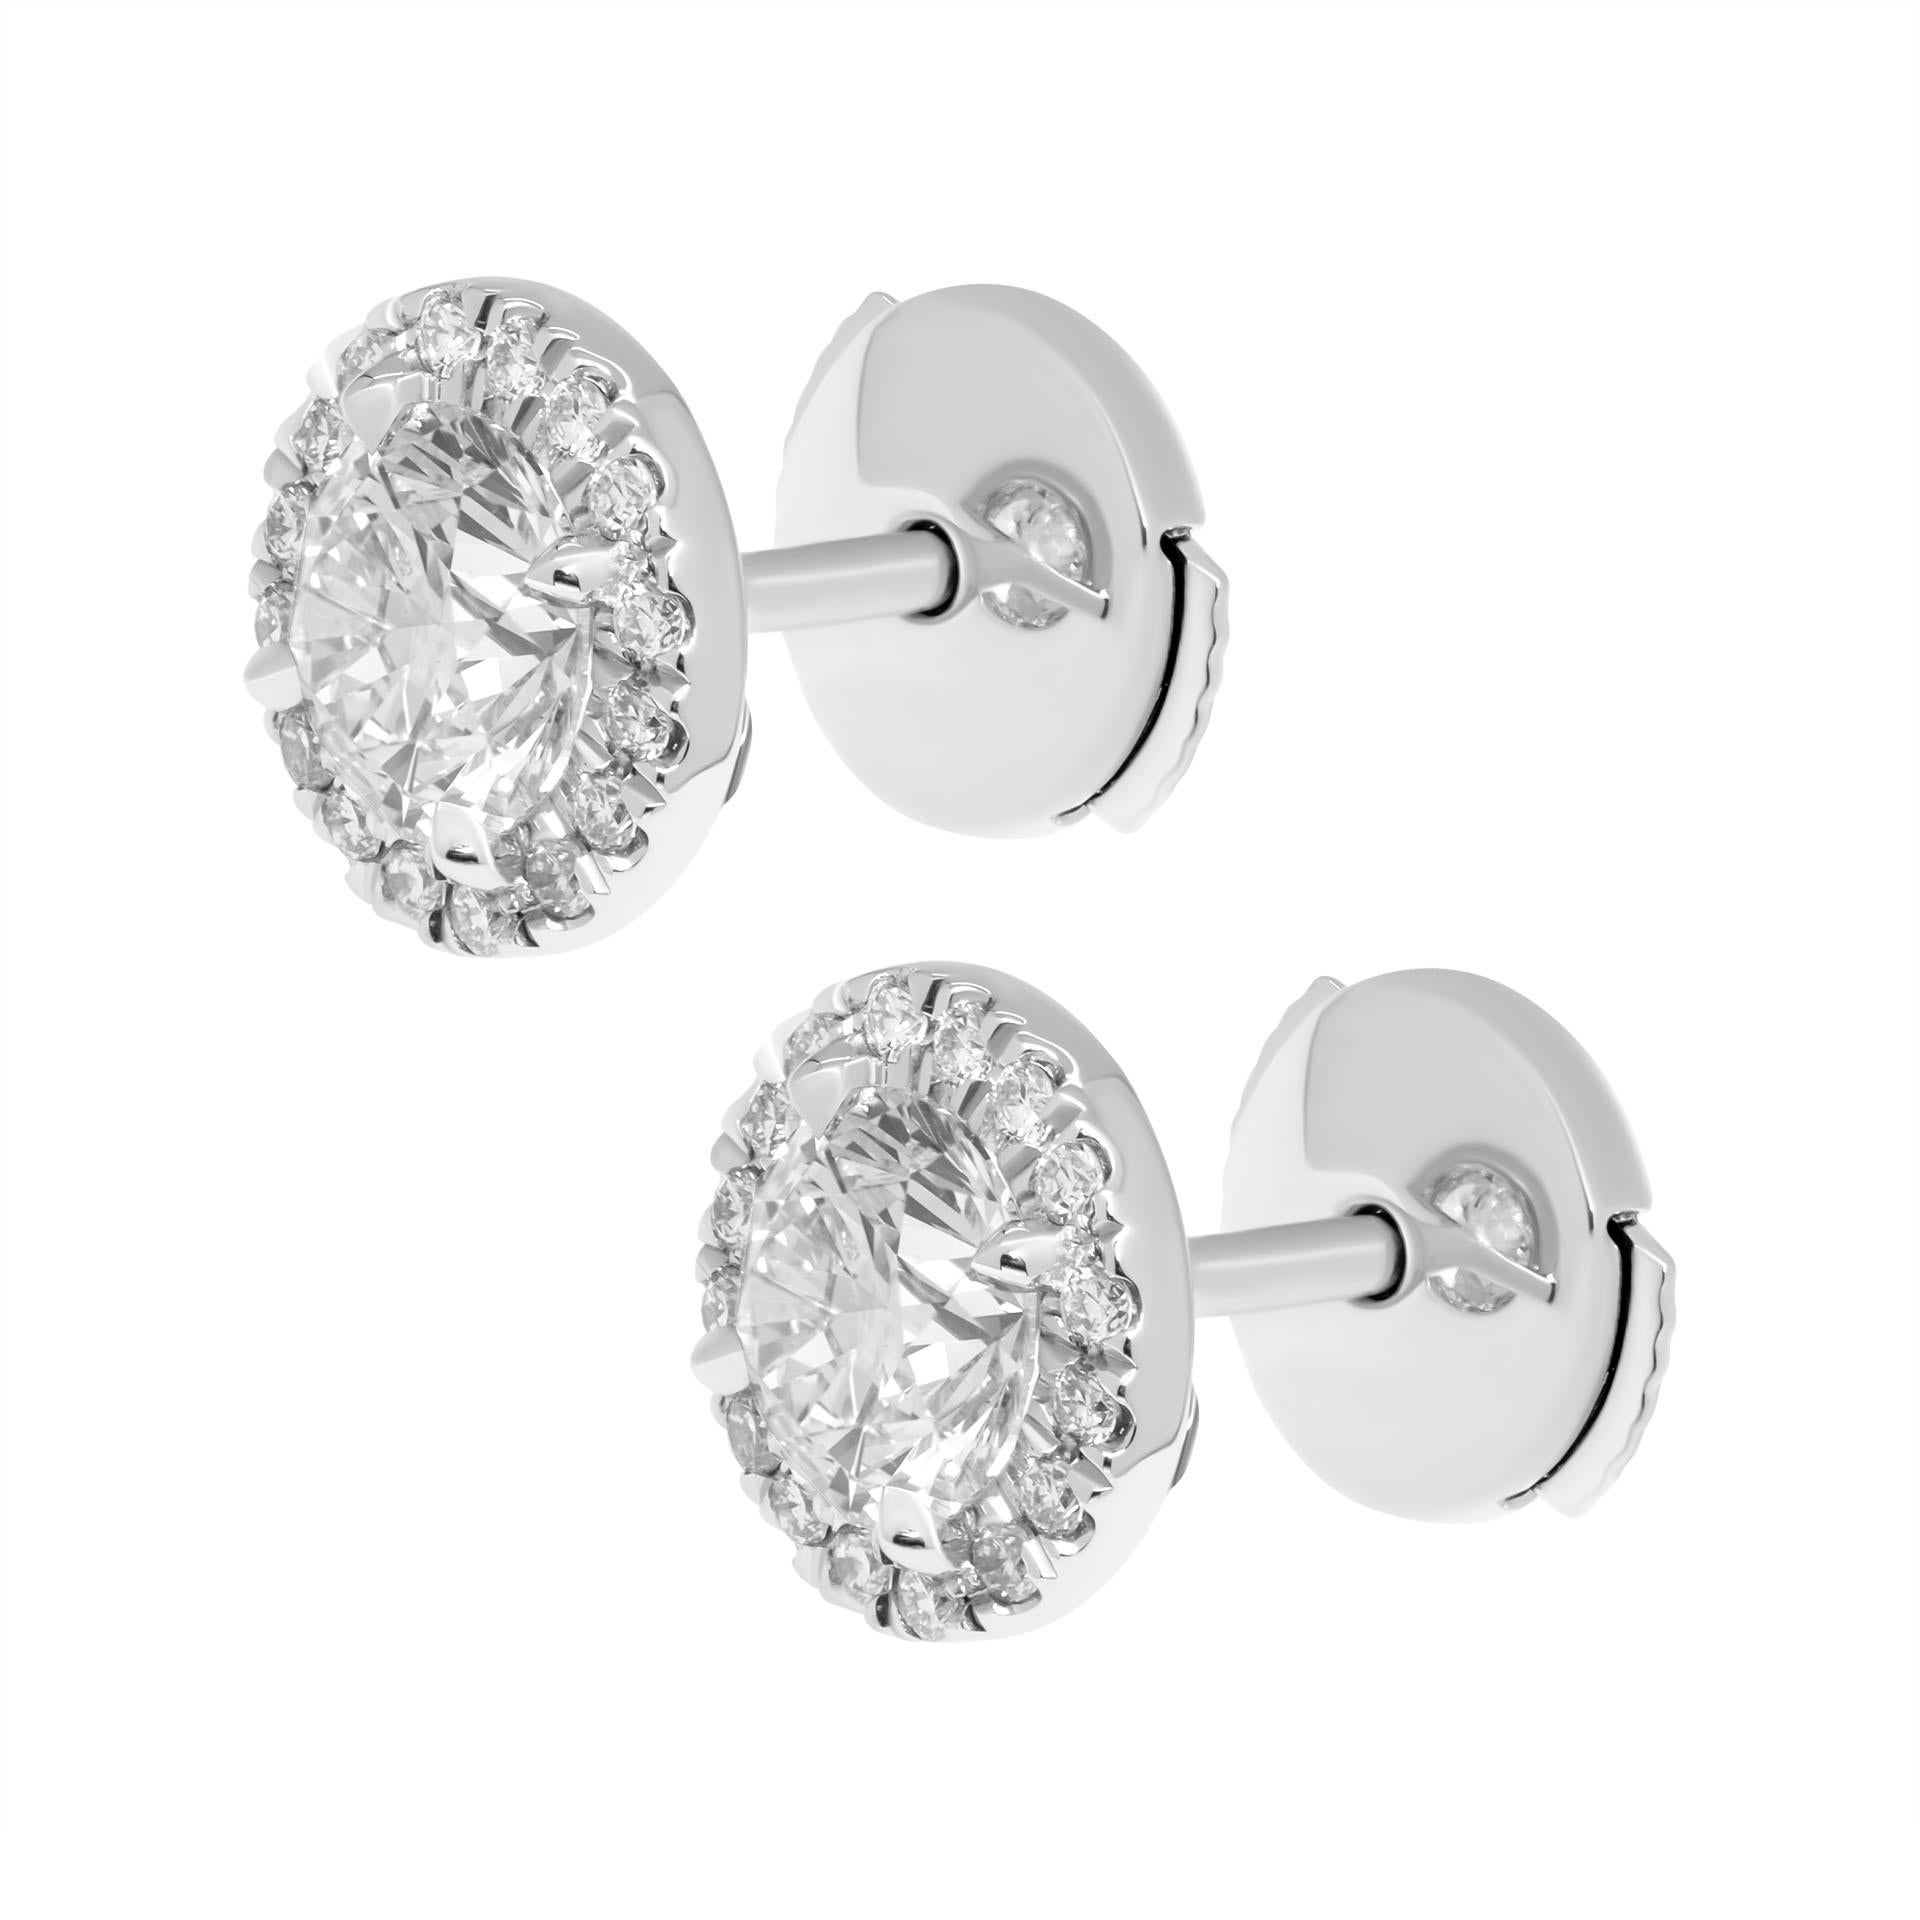 Classic halo ROUND studs in Platinum 
Total Carat Weight: 1.40ct (0.70ct each rounds diamond) (5.60mm each)
